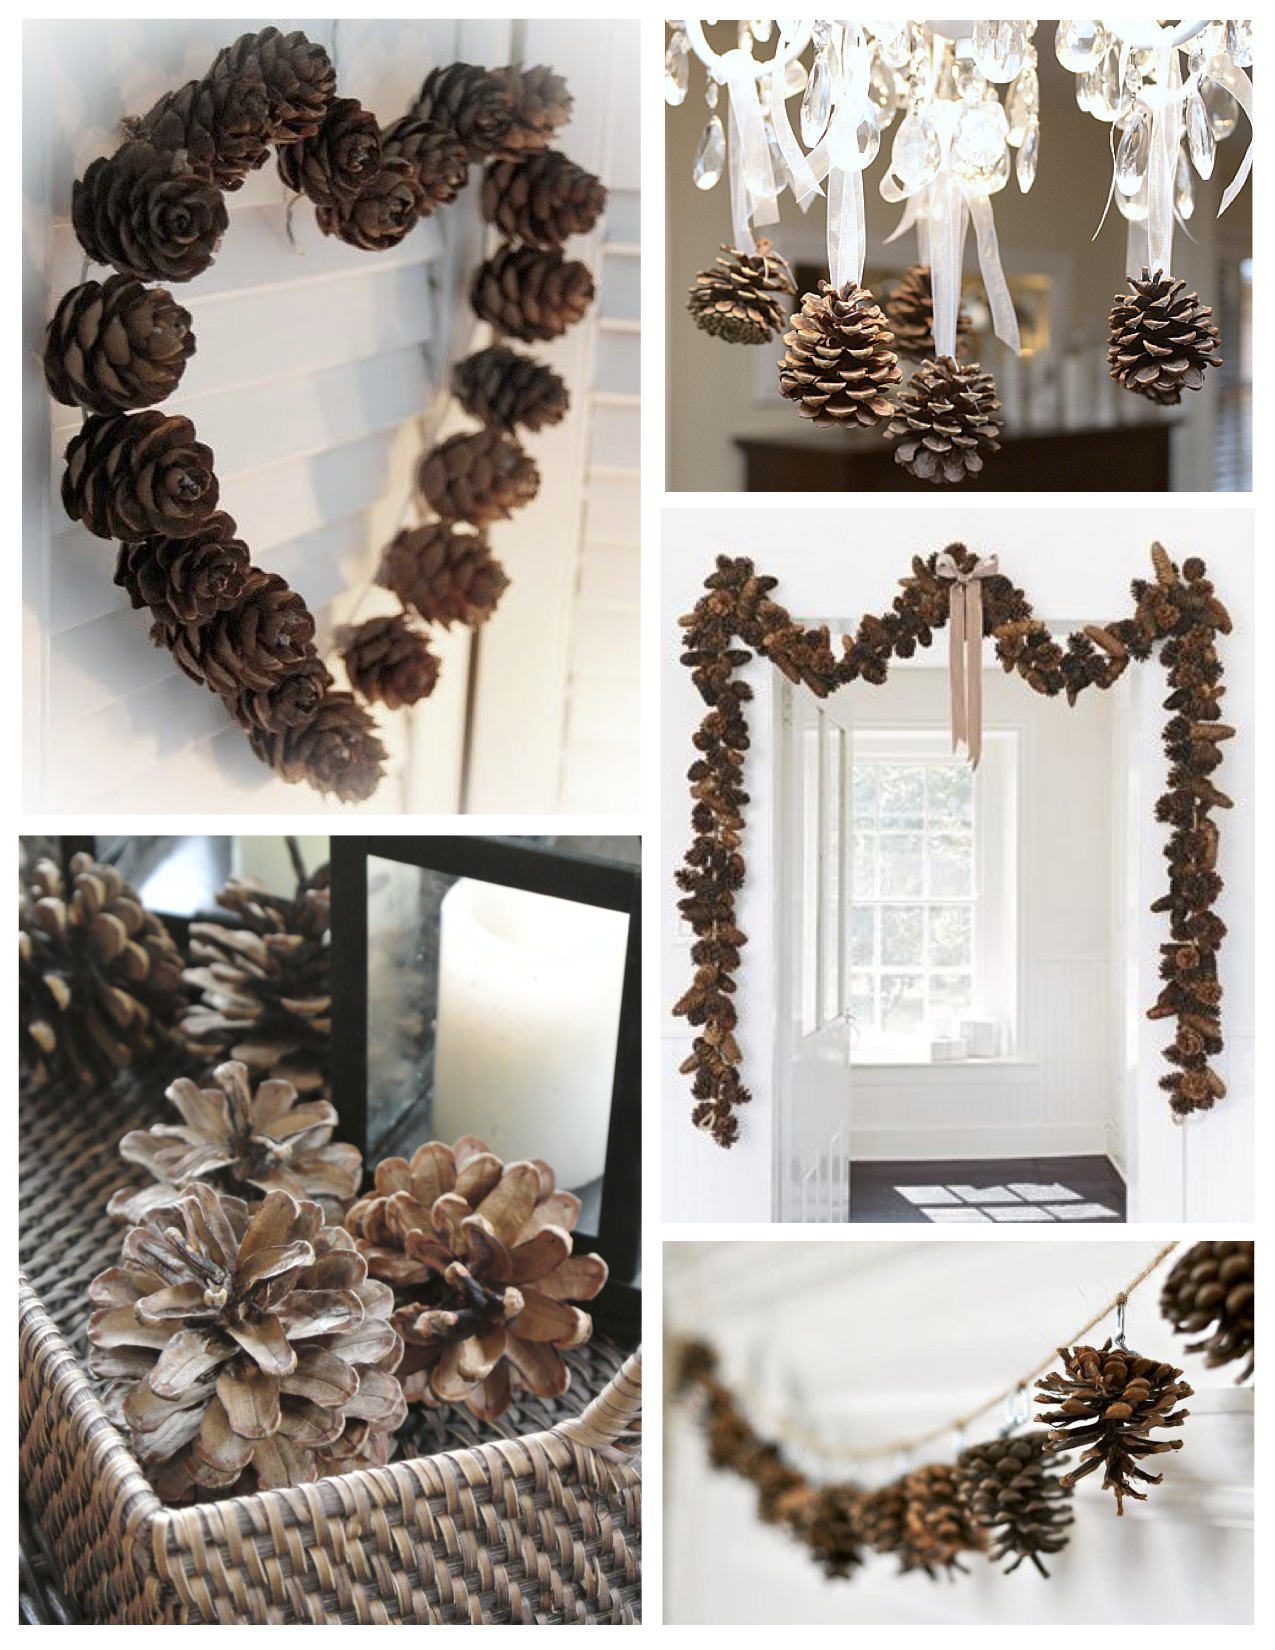 Pine Cone Home Decor : Natural Big Pinecone Oval Pine Cones Home Party Christmas ... / You'll find custom amish furniture made by a family owned business in ohio, seasonal.